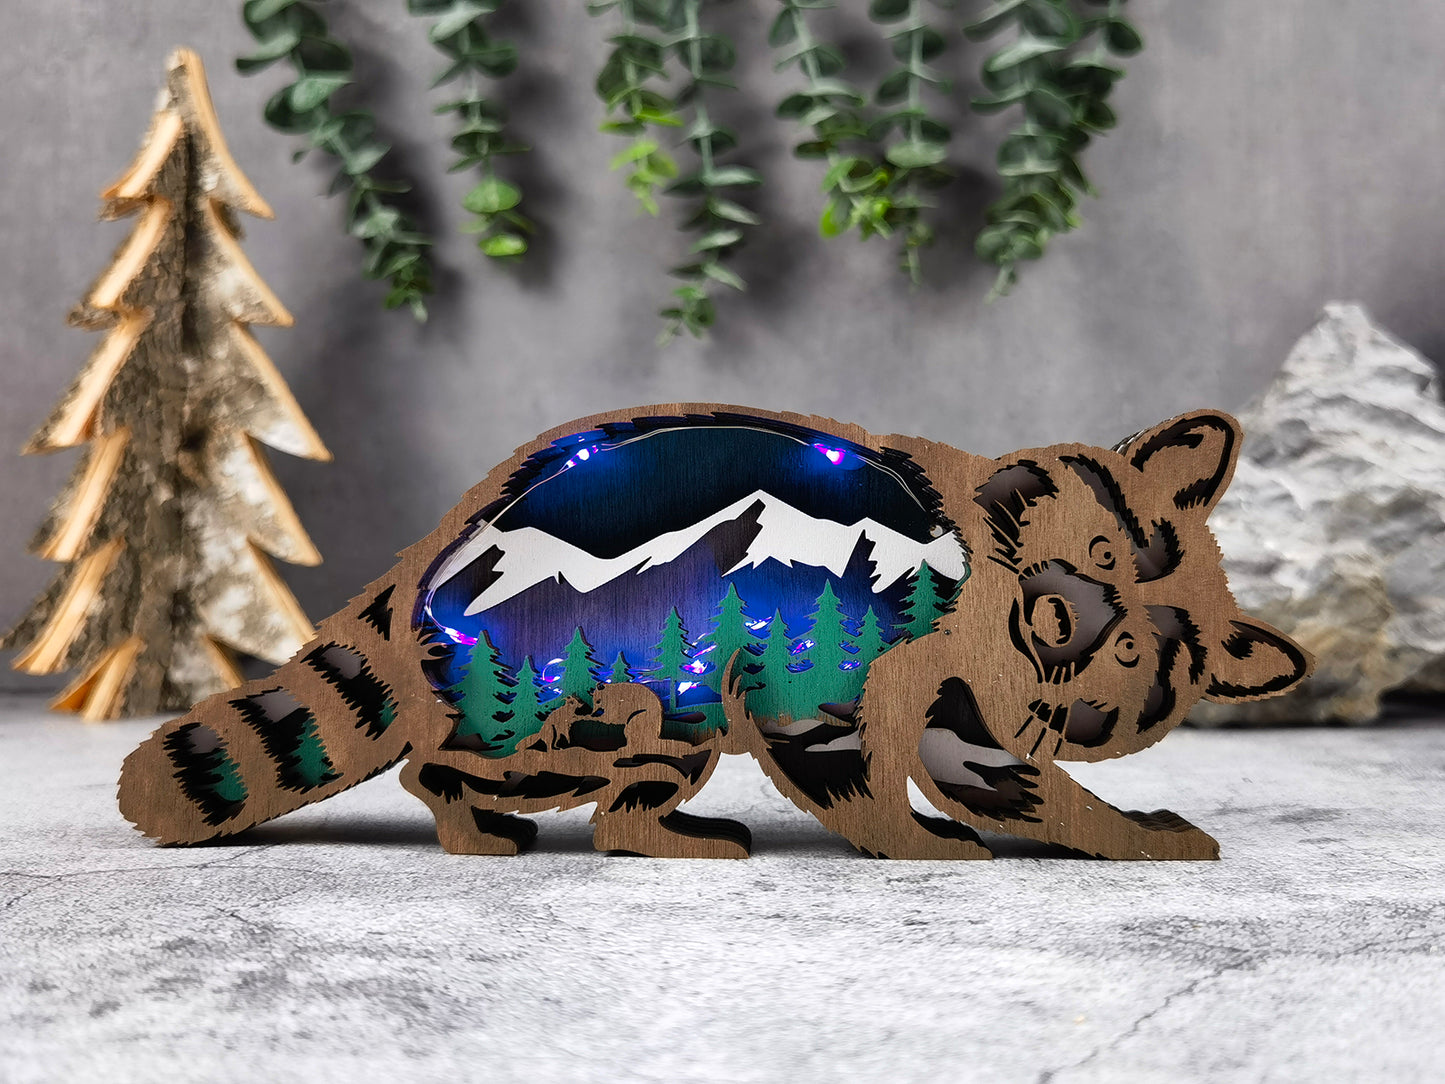 3D Wooden Raccoon carved with lights ,Wooden Forest Scene,Desktop ornaments,Wall Decoration,Door Decor,Free Engraving